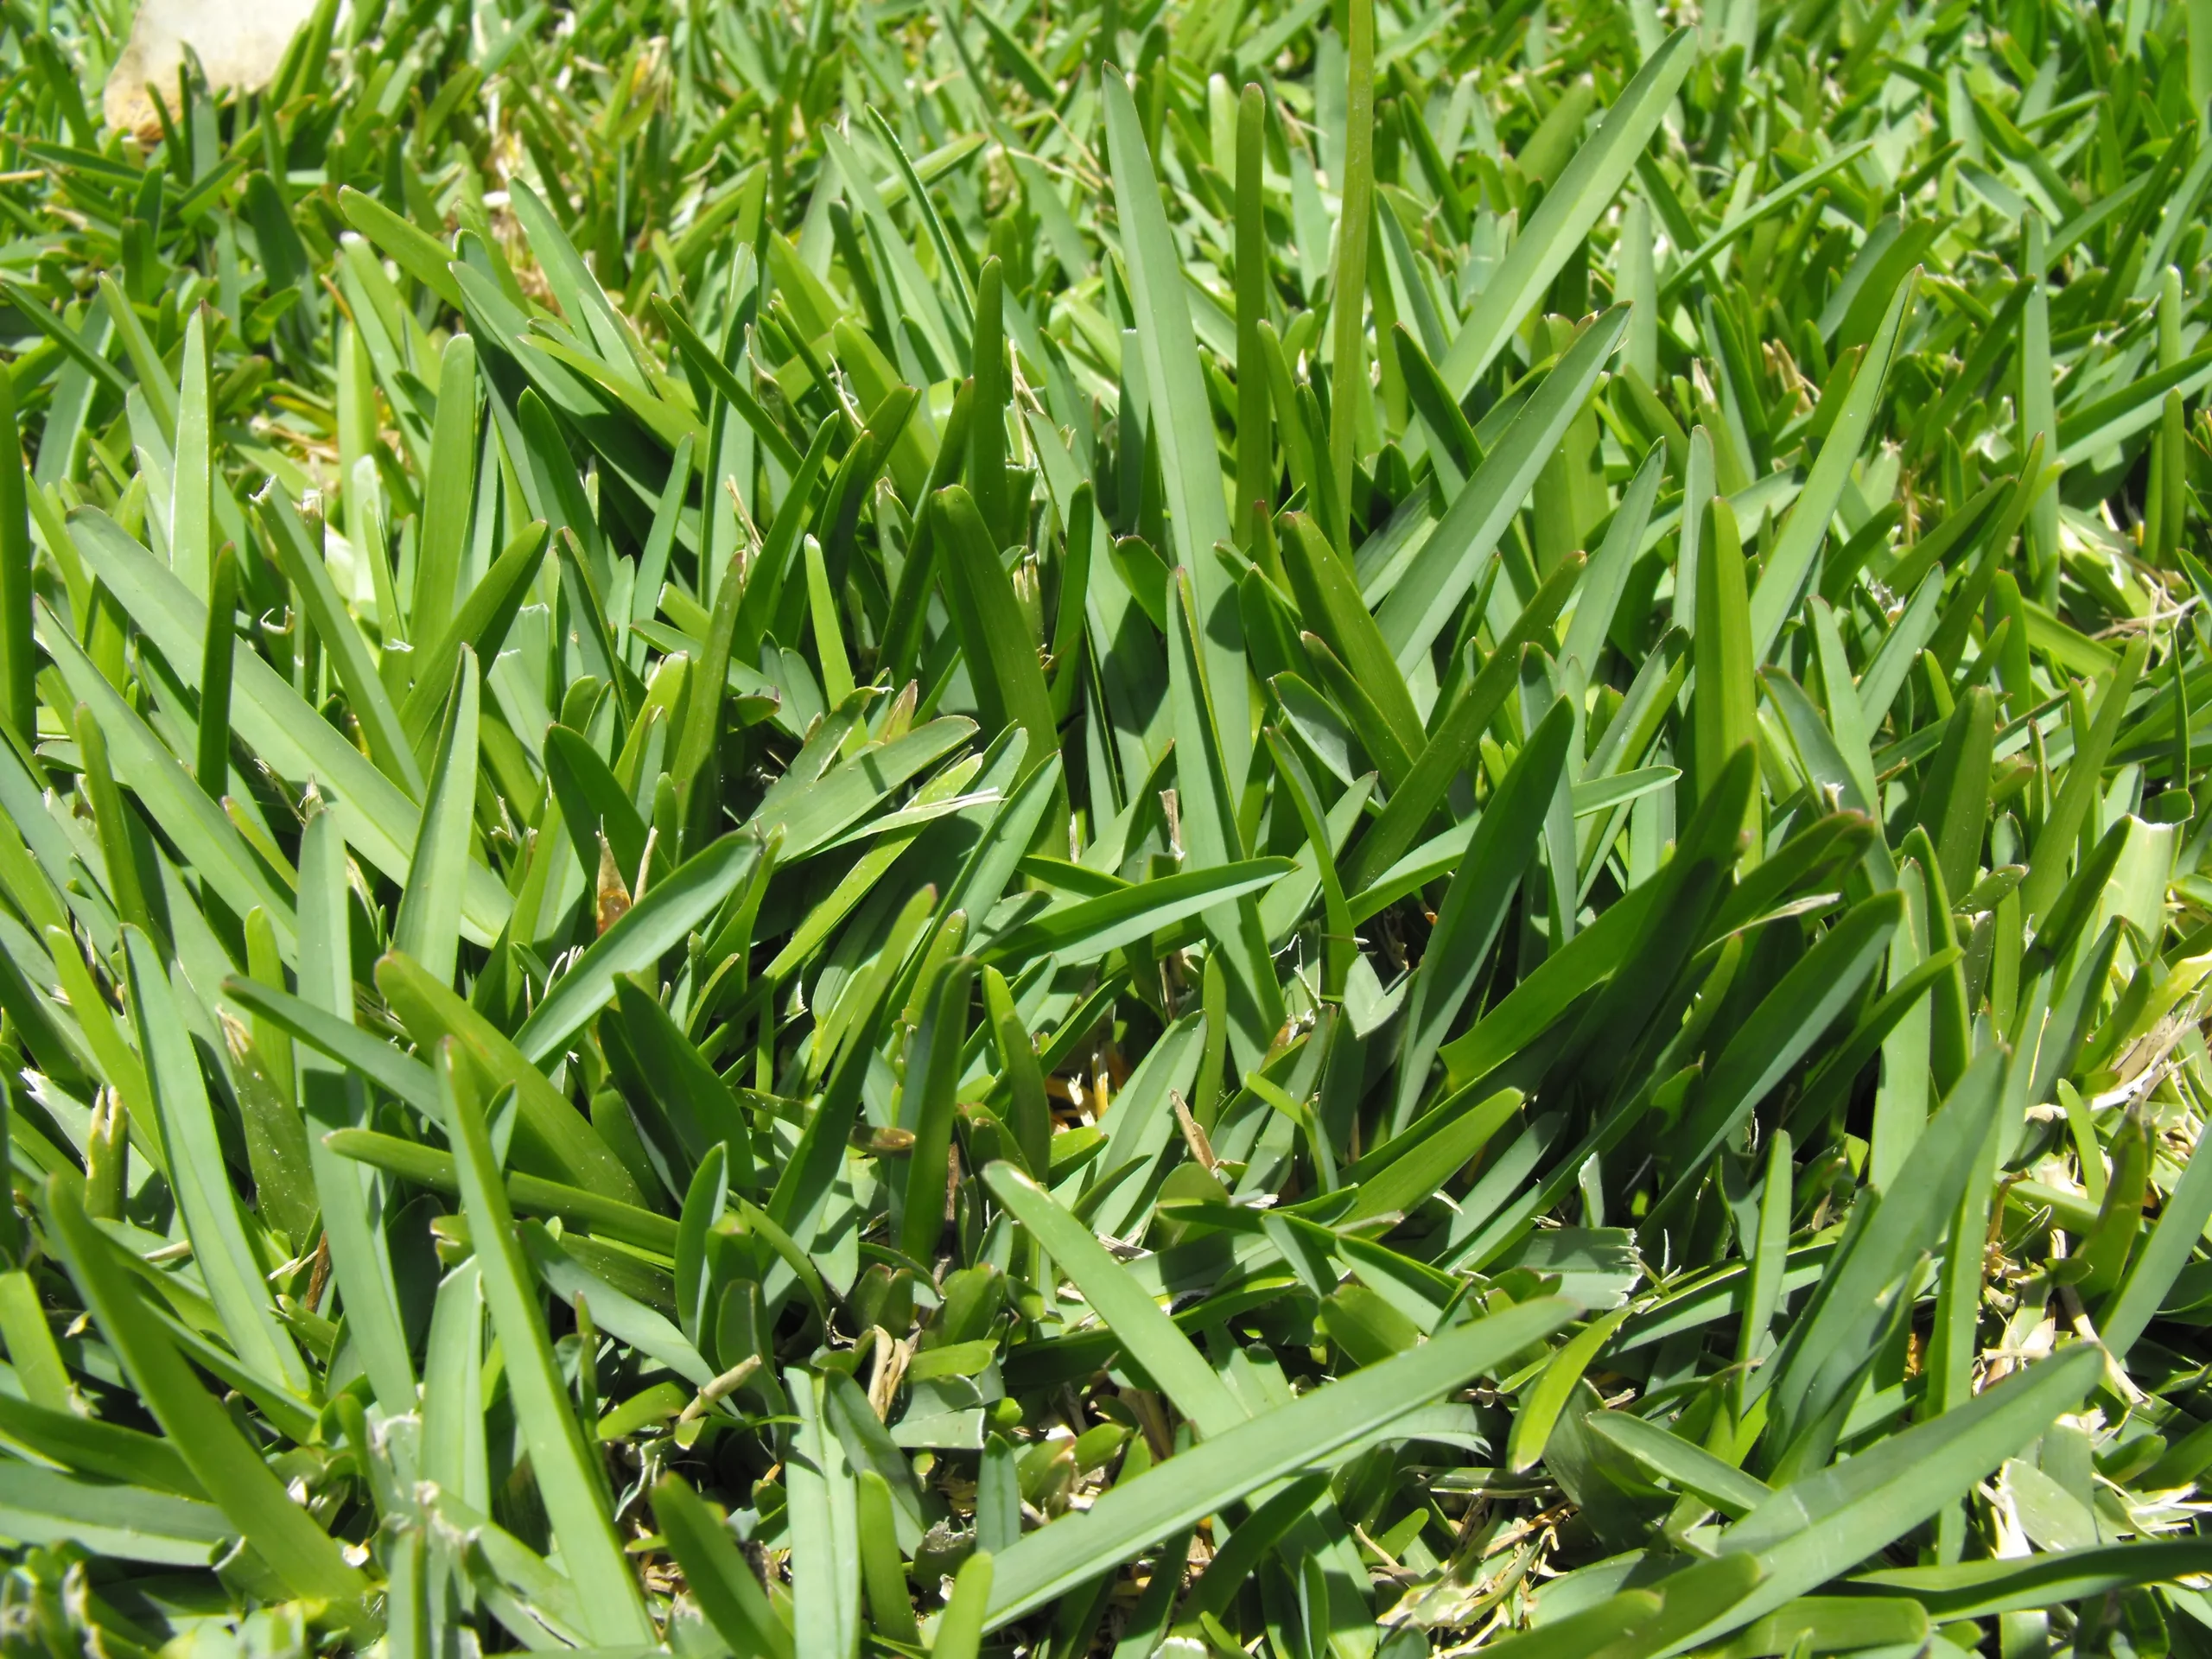 Close-up of lush, green grass blades, illustrating the healthy lawn results achieved through professional College Park lawn care services.